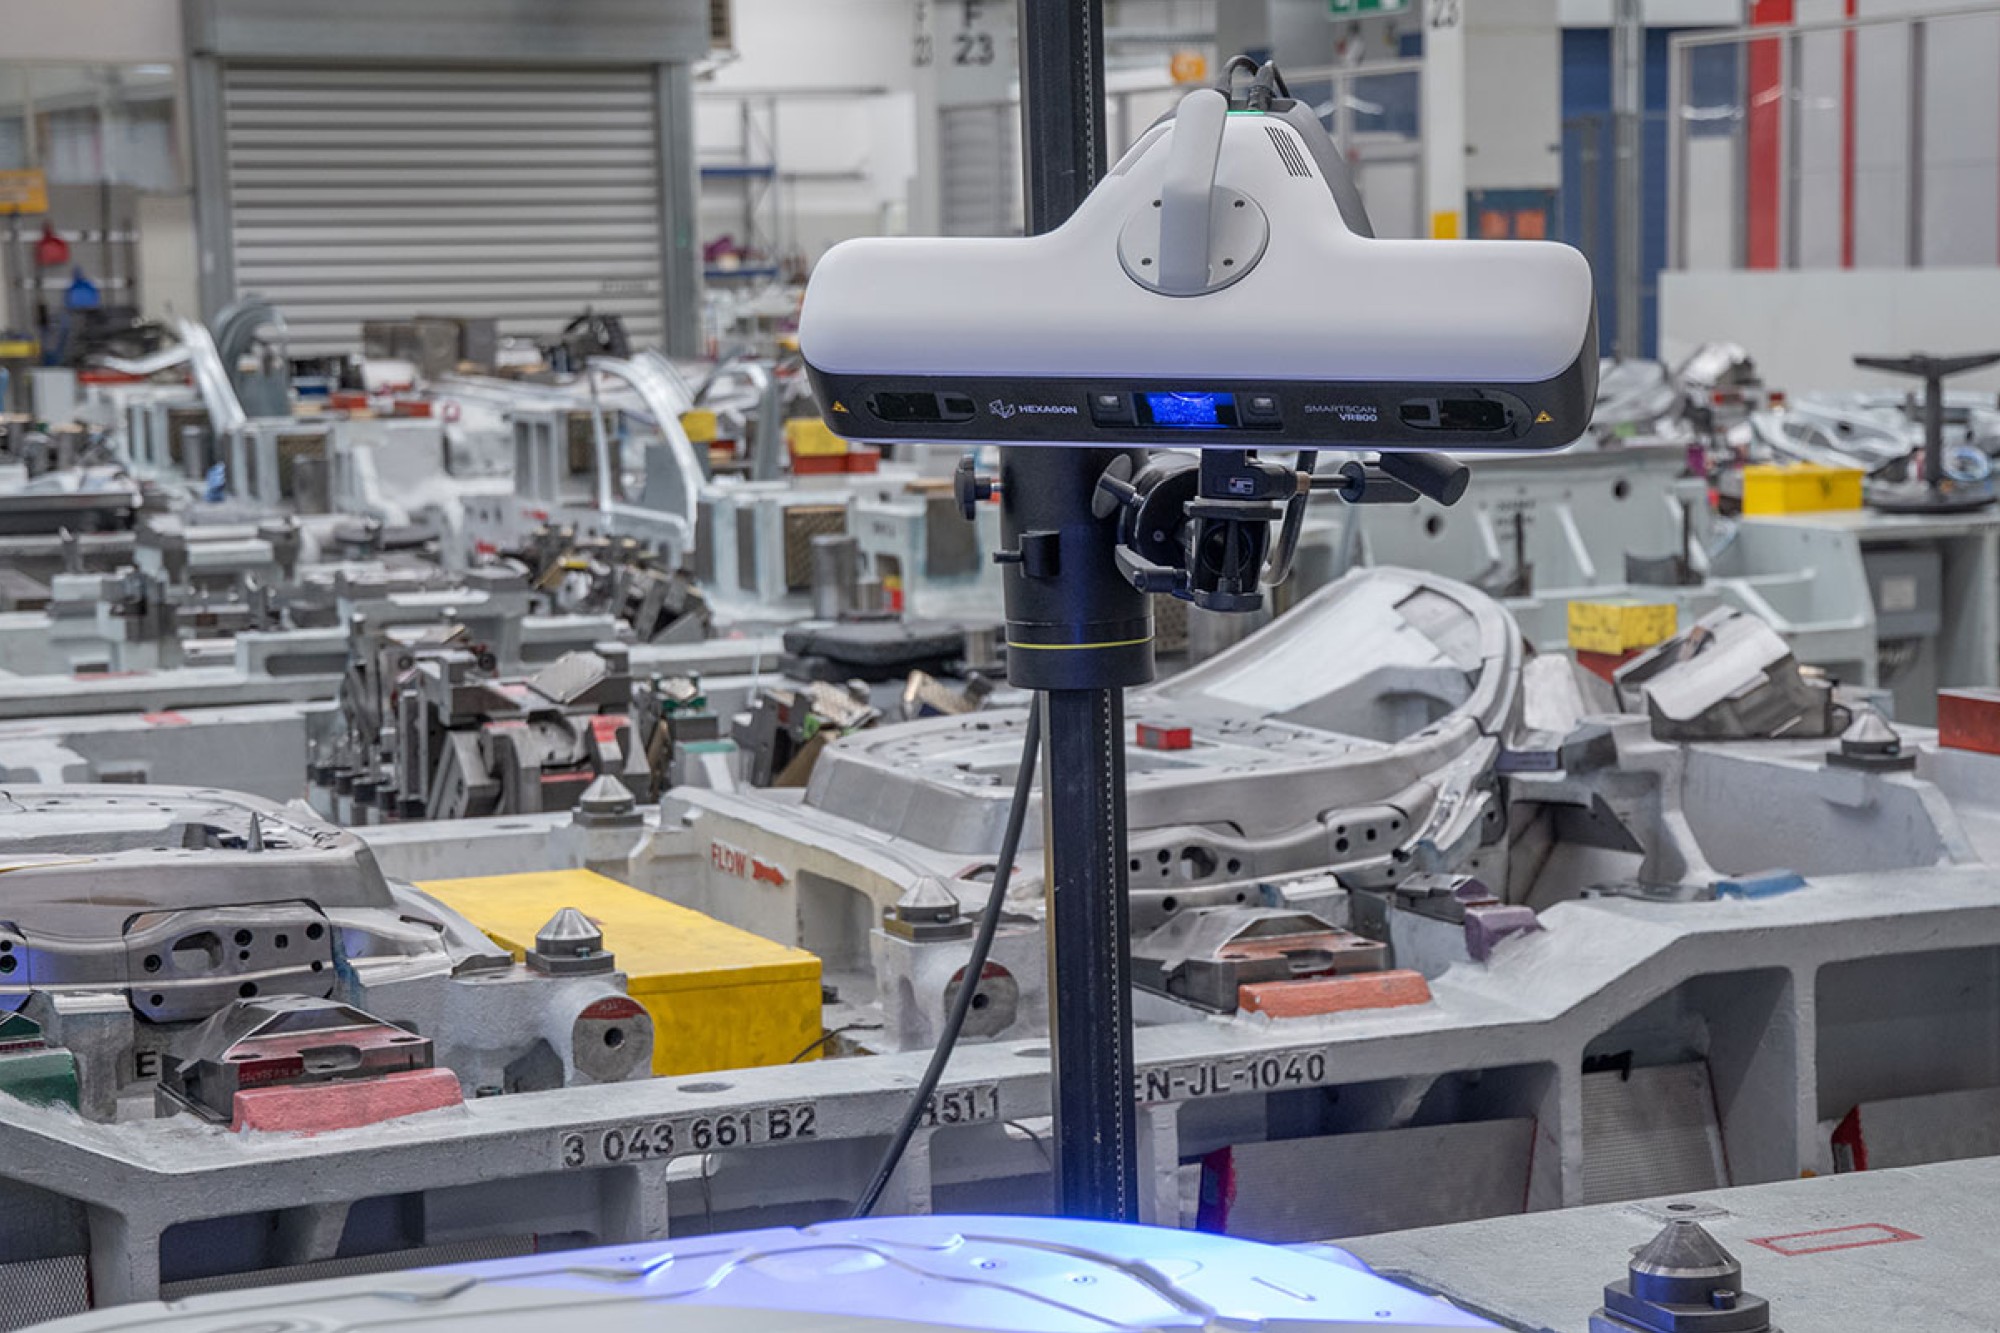 Hexagon provides a zoom-enabled optical 3D scanner for inspecting complex parts